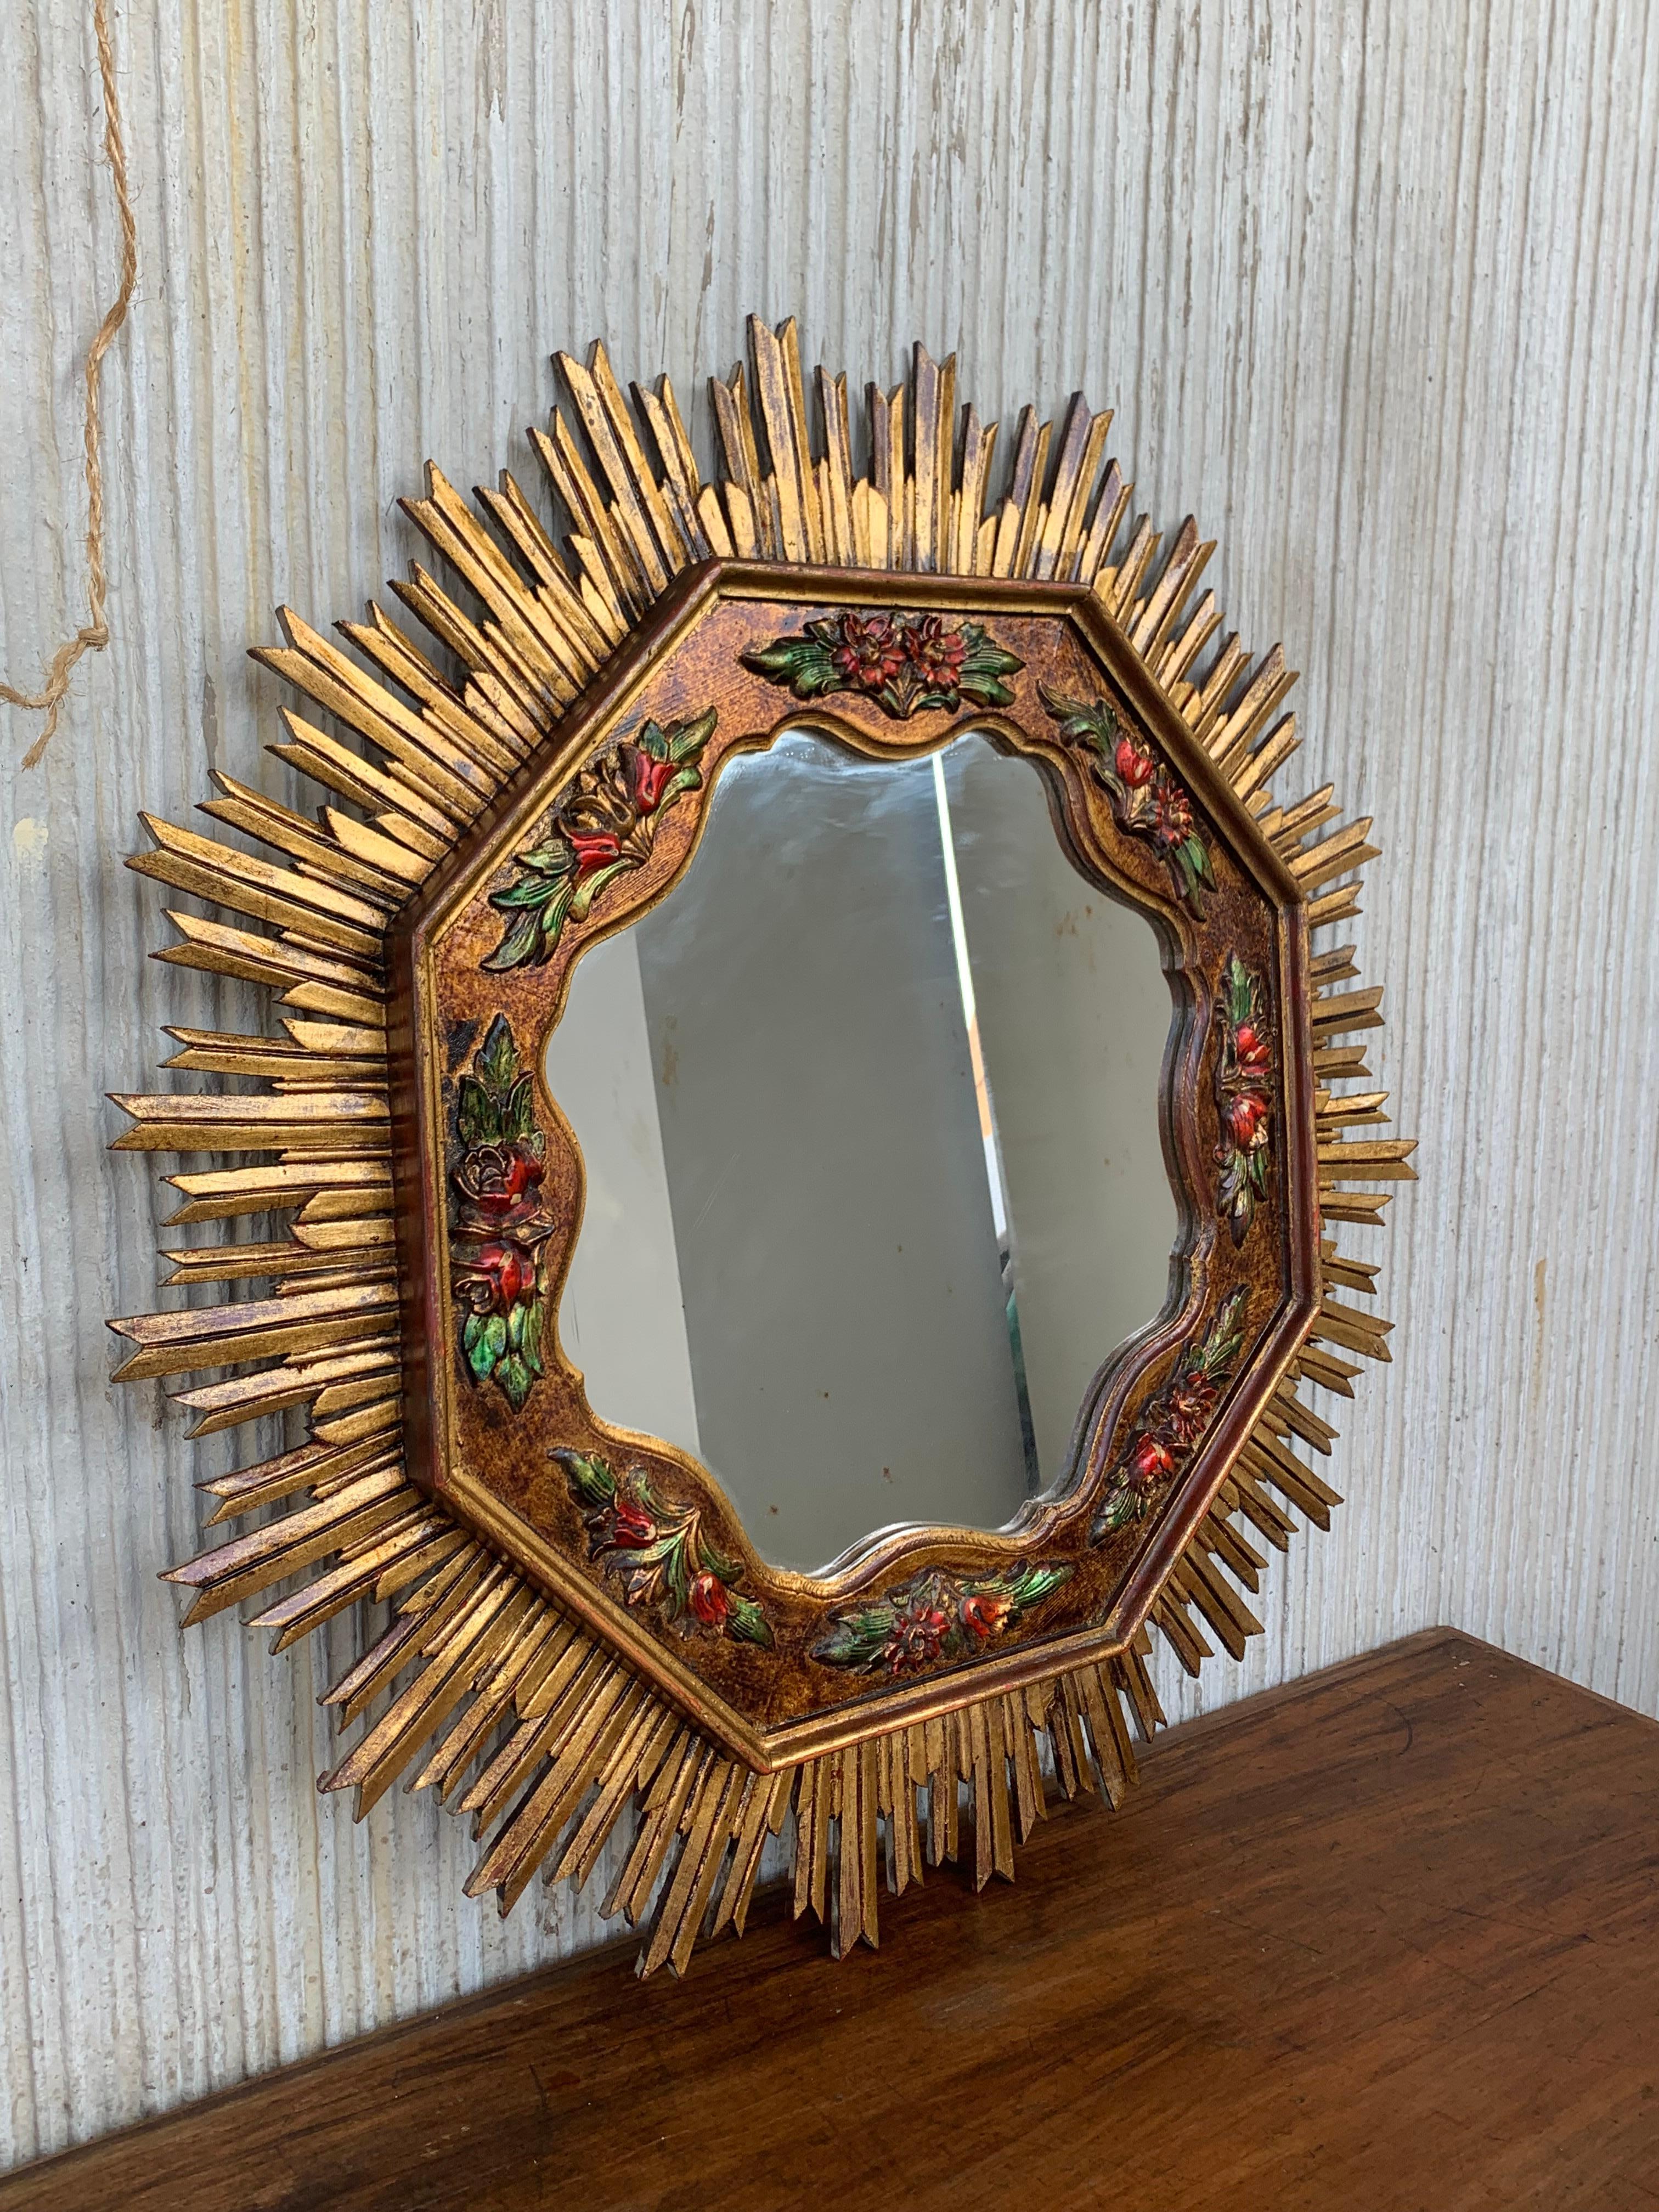 A magnificent and large early to mid-20th century French gilded and carved wood sunburst mirror with unusual octogonal shape, featuring a beautiful carved and highly decorative wood polychrome barbola wreath of flowers – which was a trend in the